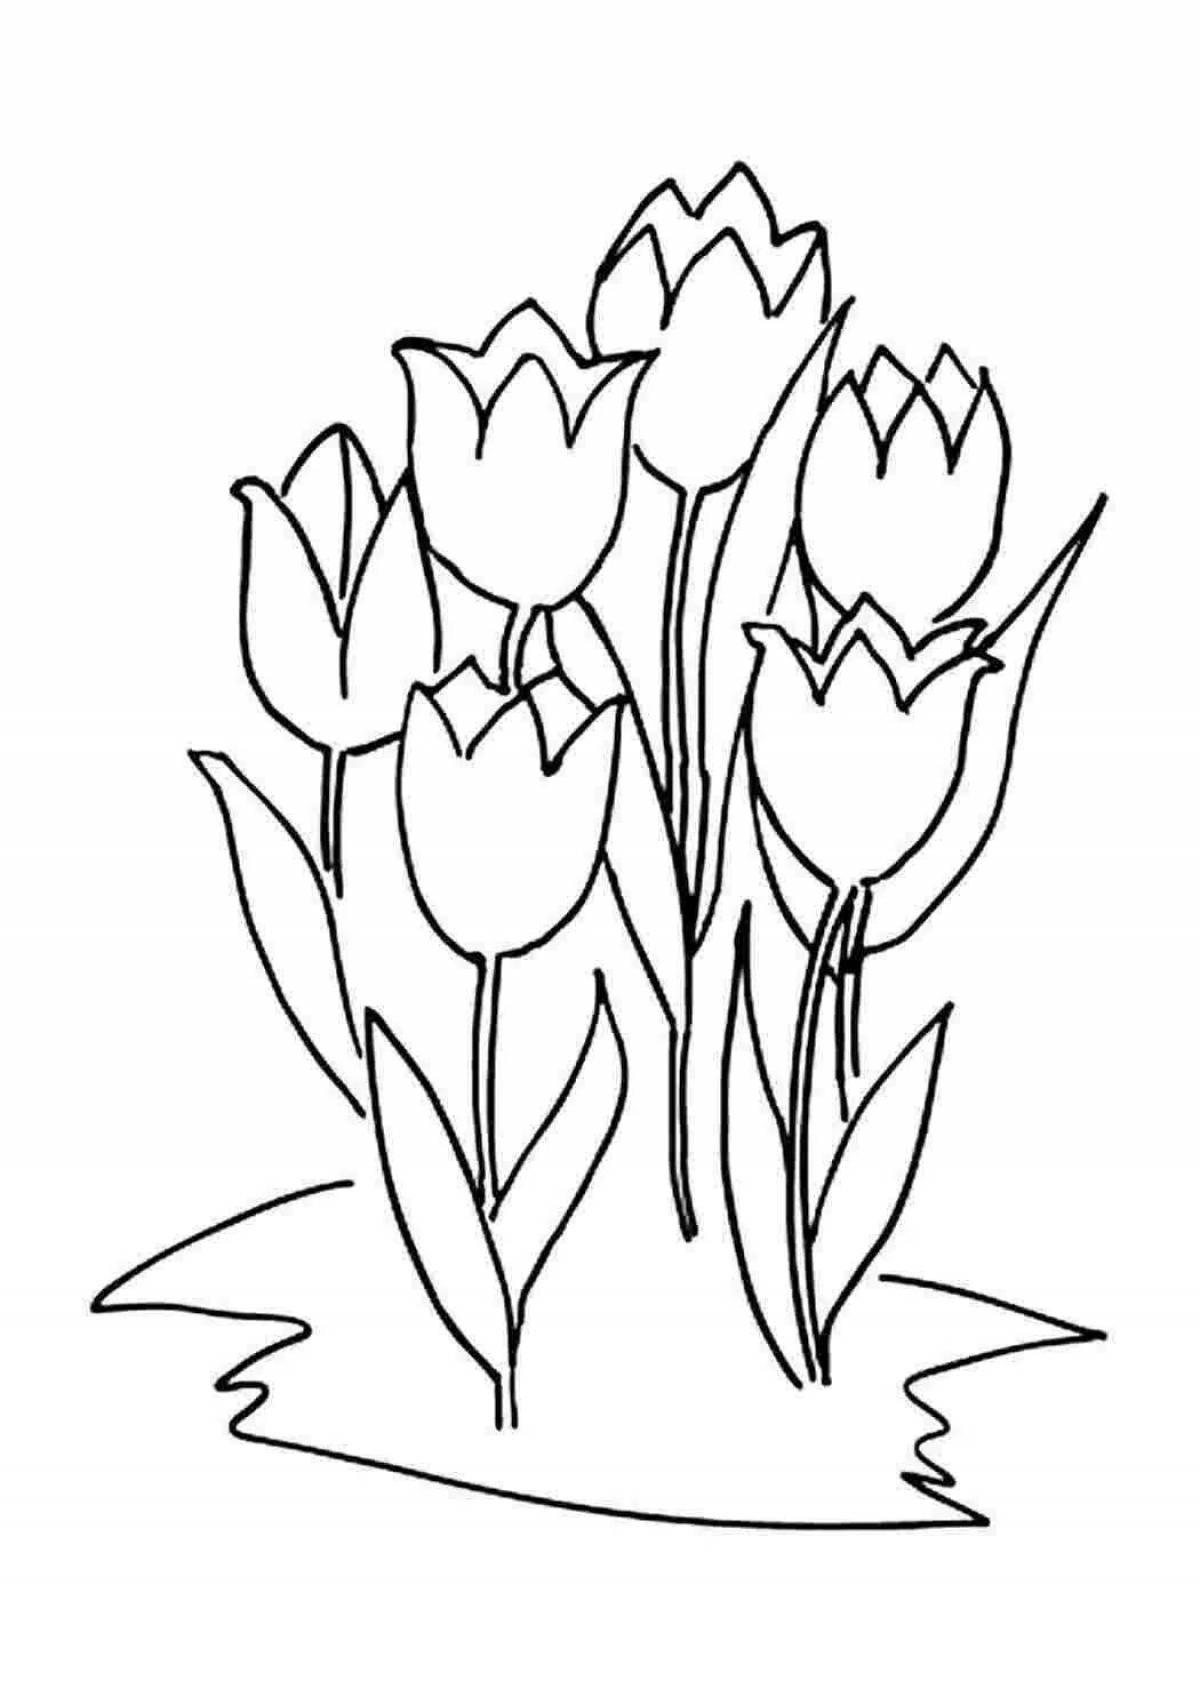 Coloring bright spring tulips